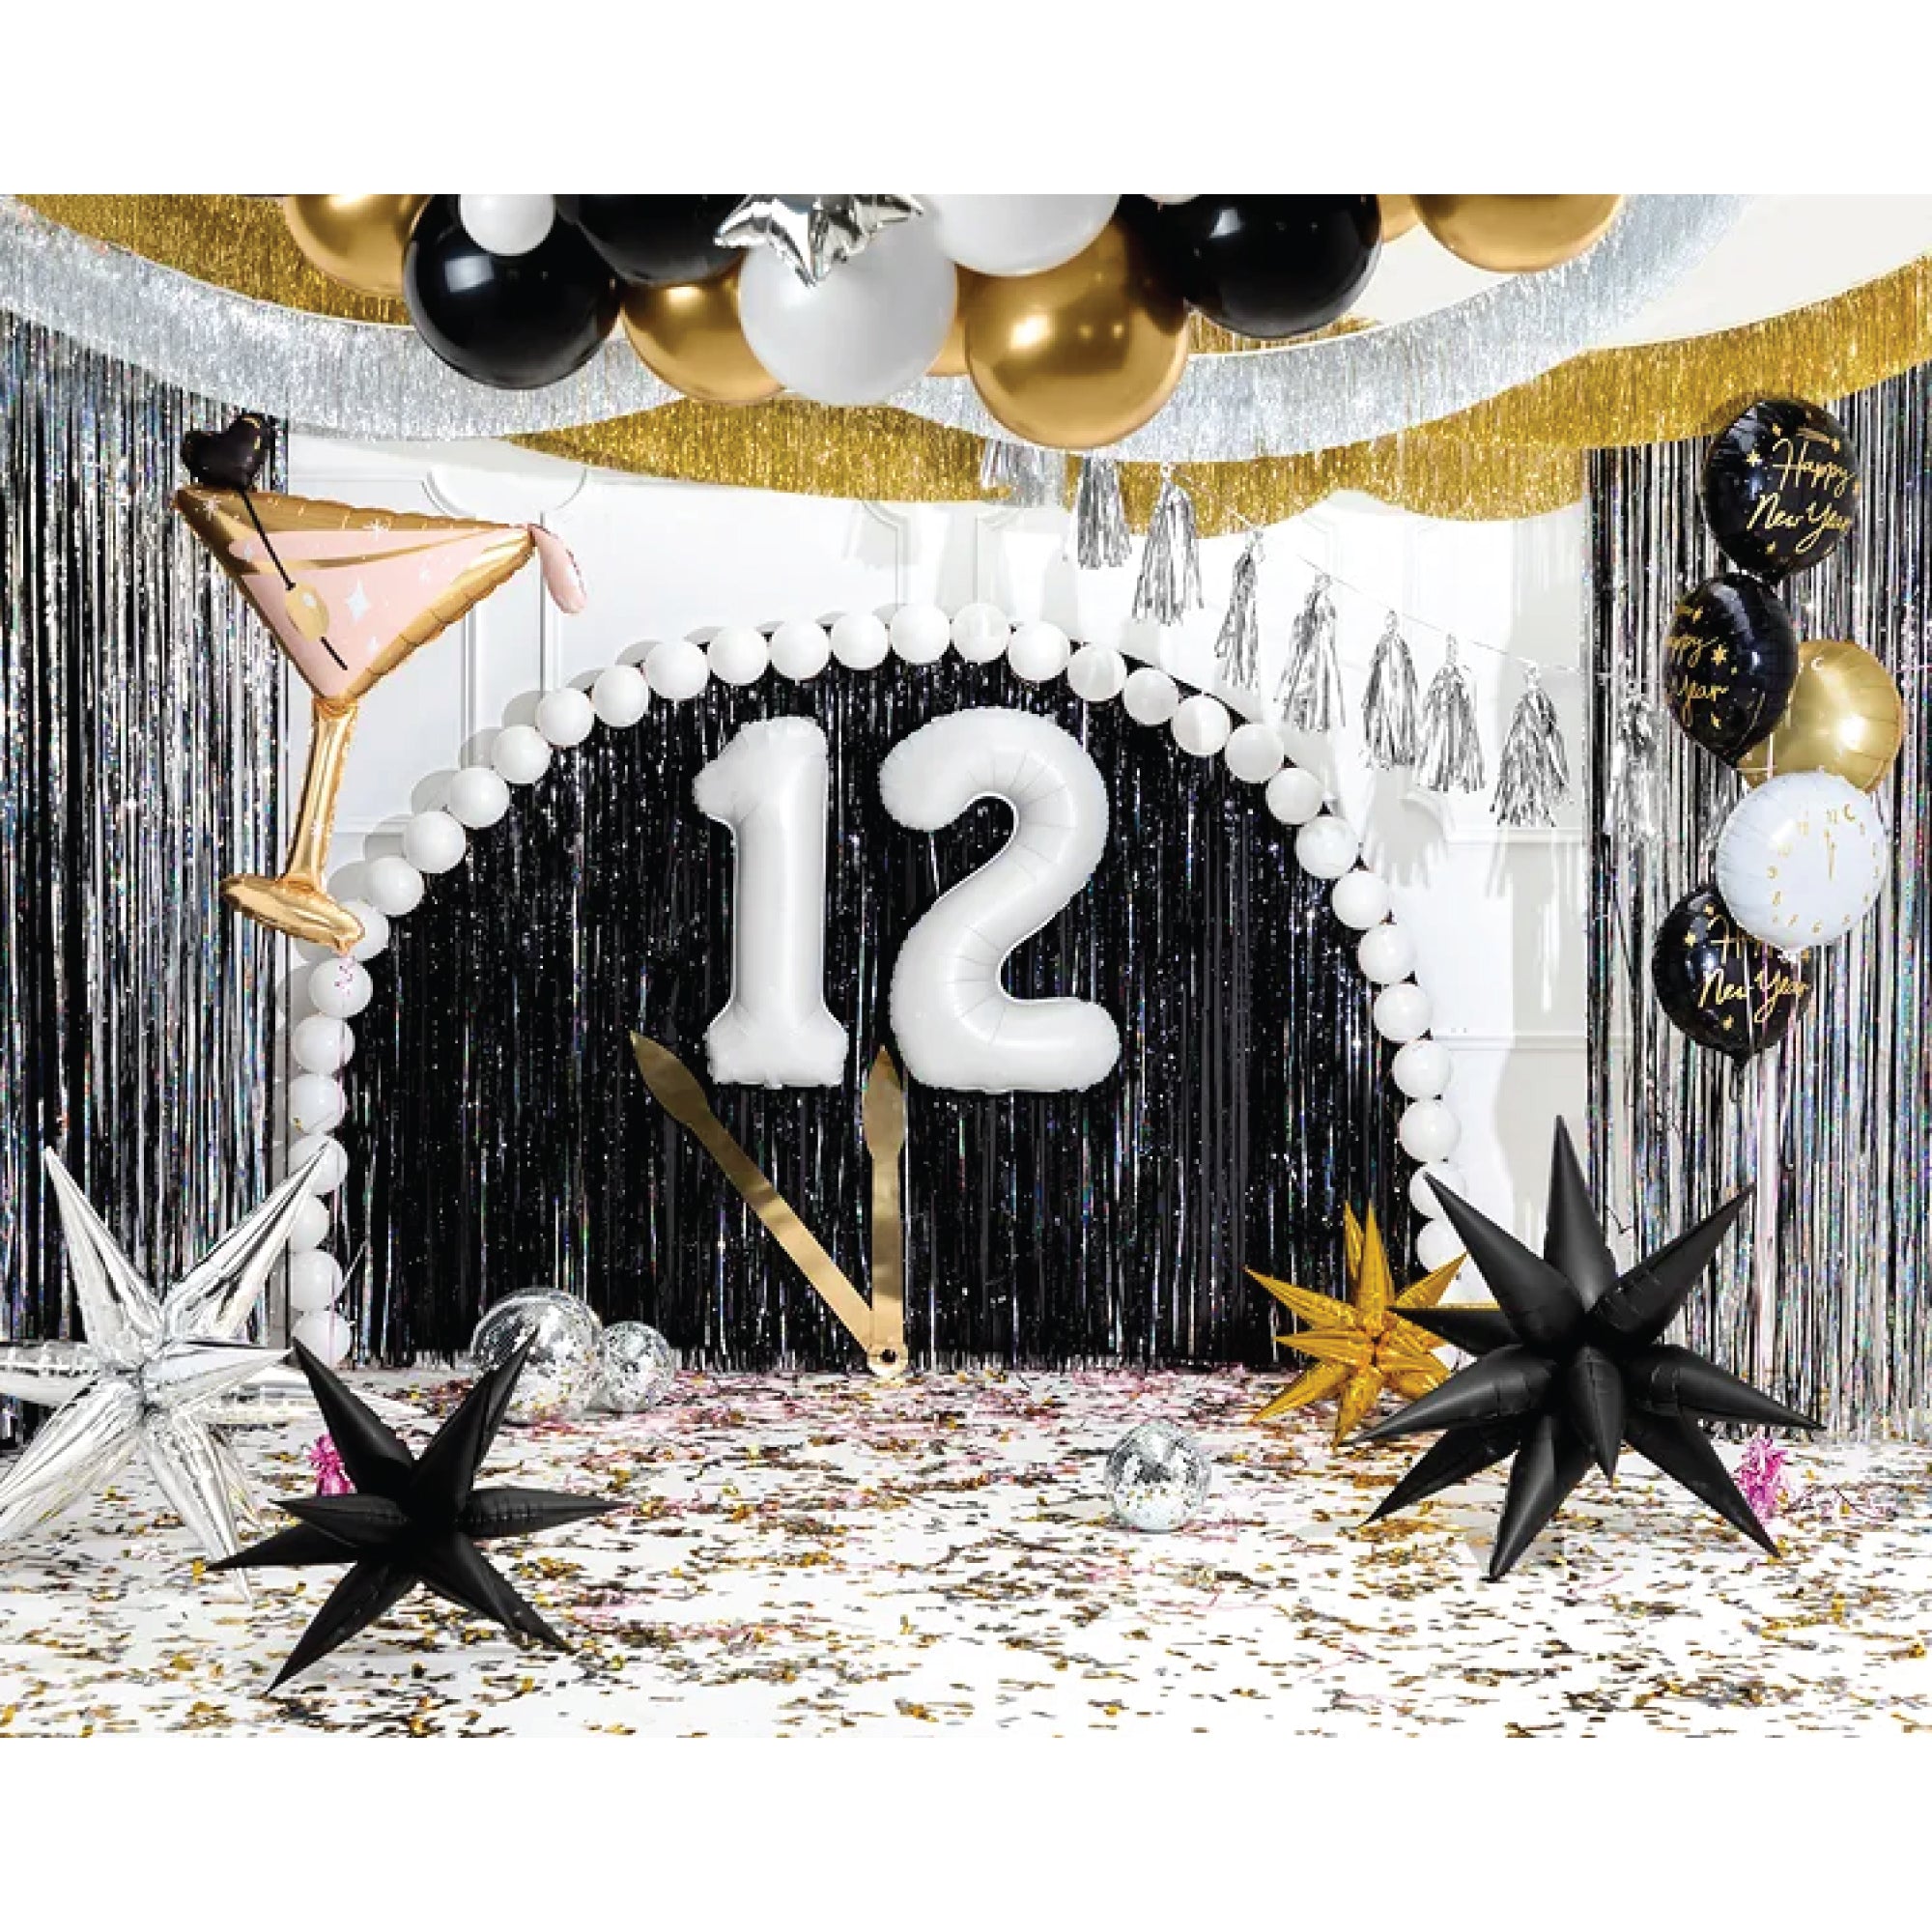 Giant Black Starburst Balloon 37in | The Party Darling